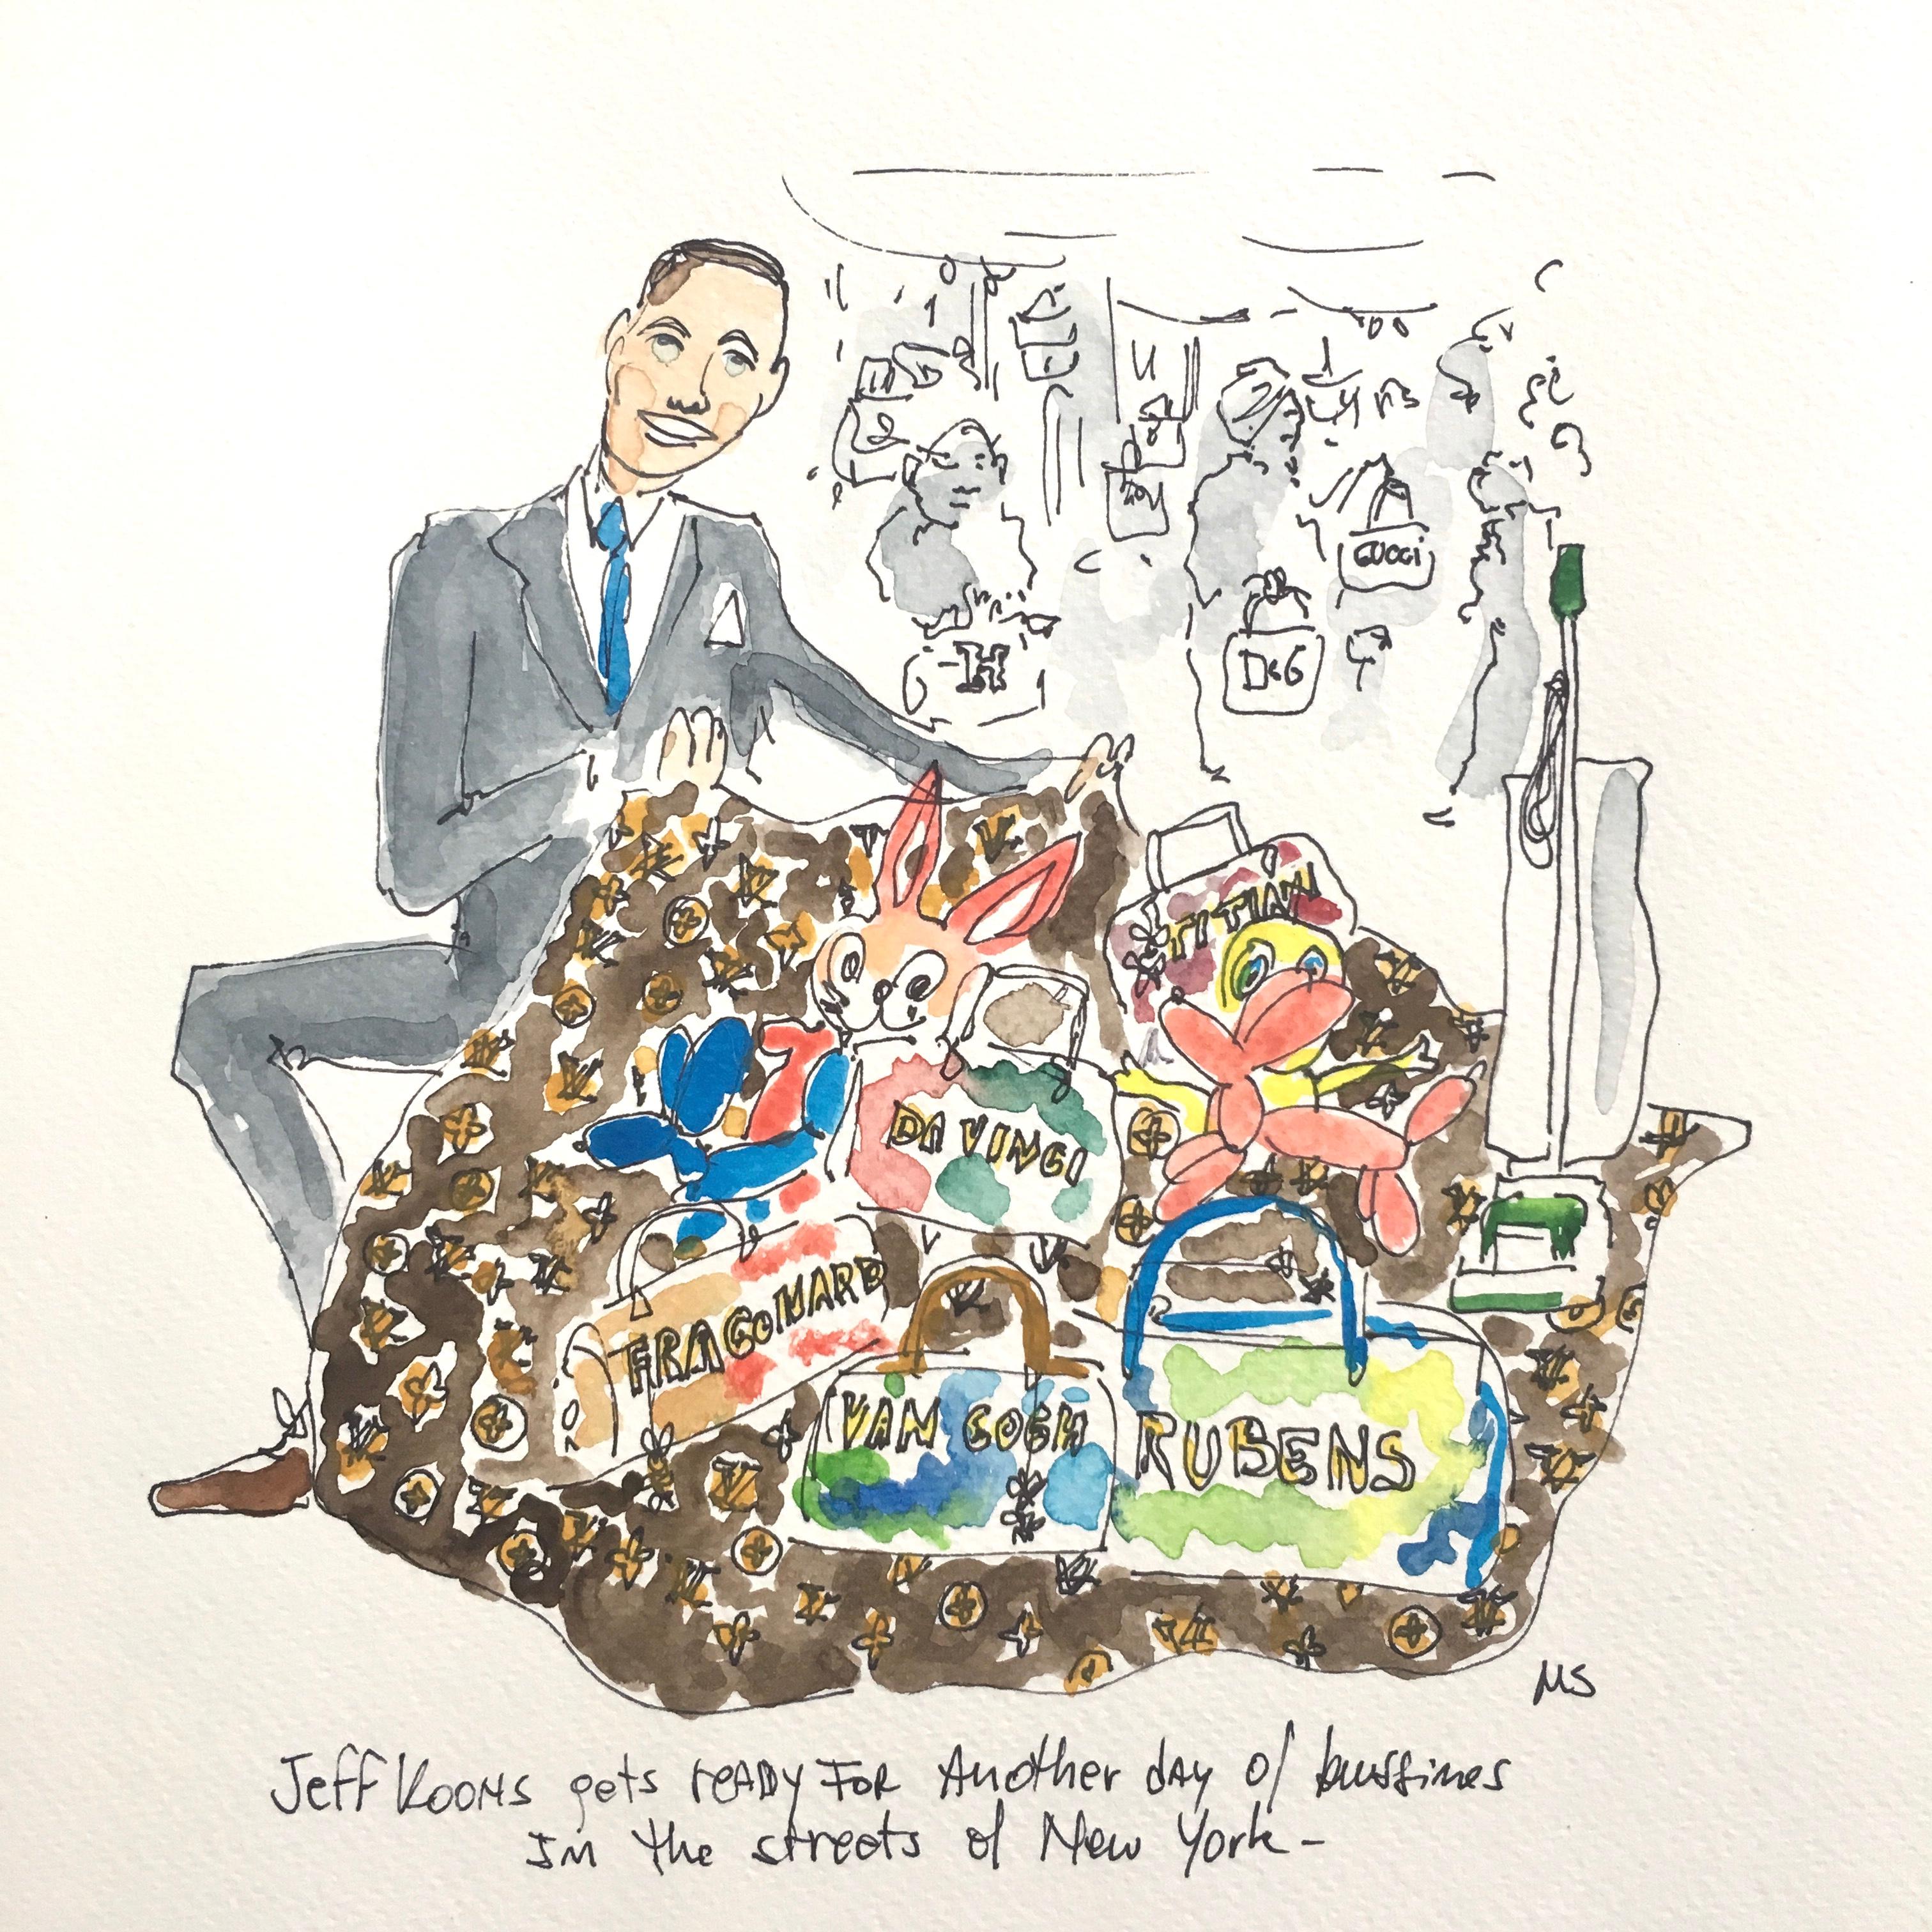 Jeff Koons Doing Business in NY - One of a kind watercolor - Art by Manuel Santelices